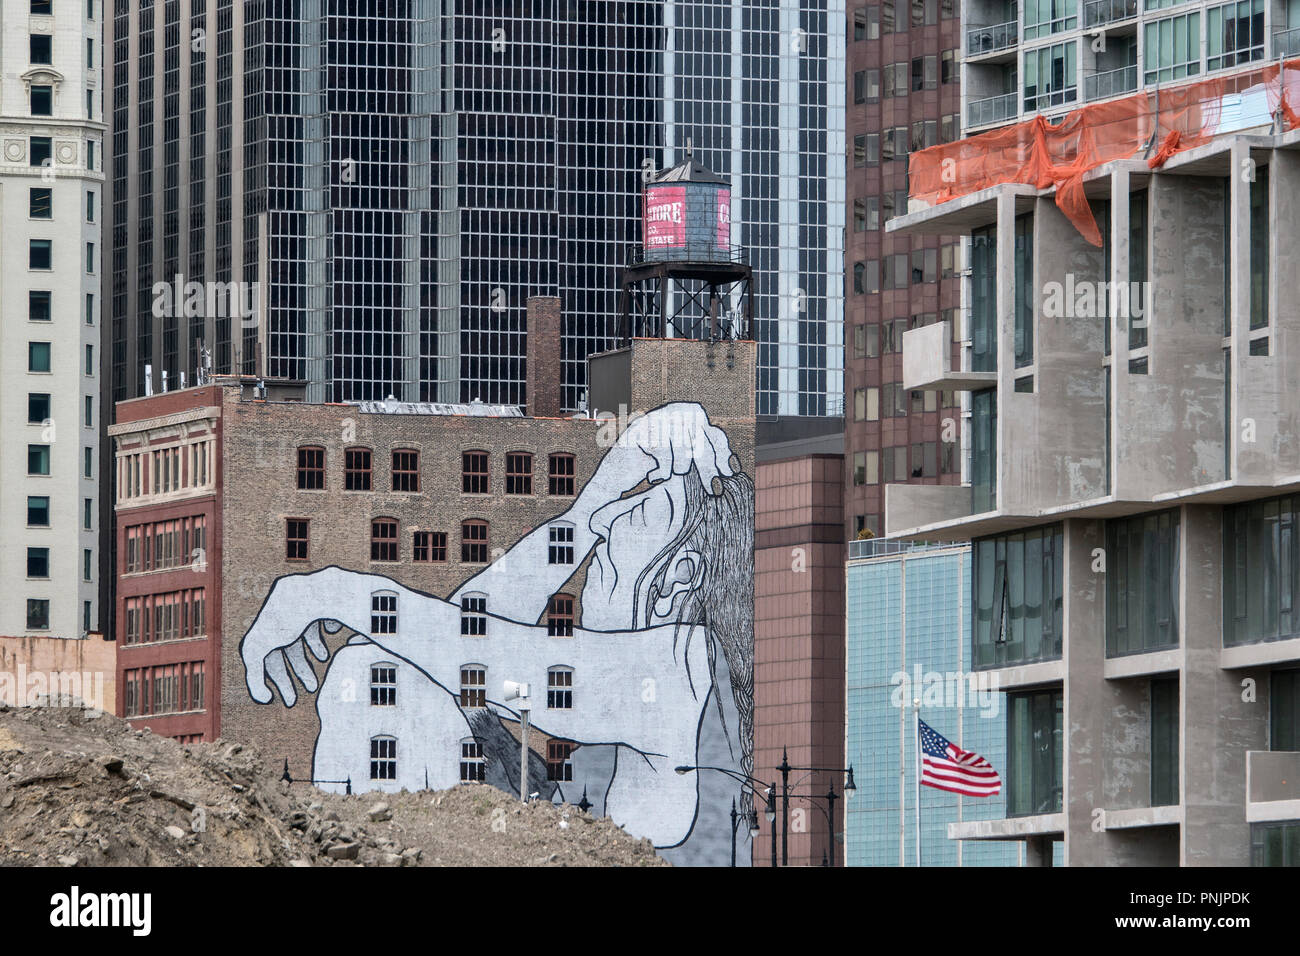 Detail of an old and new building with a large mural and American flag, Downtown Chicago, IL. Stock Photo